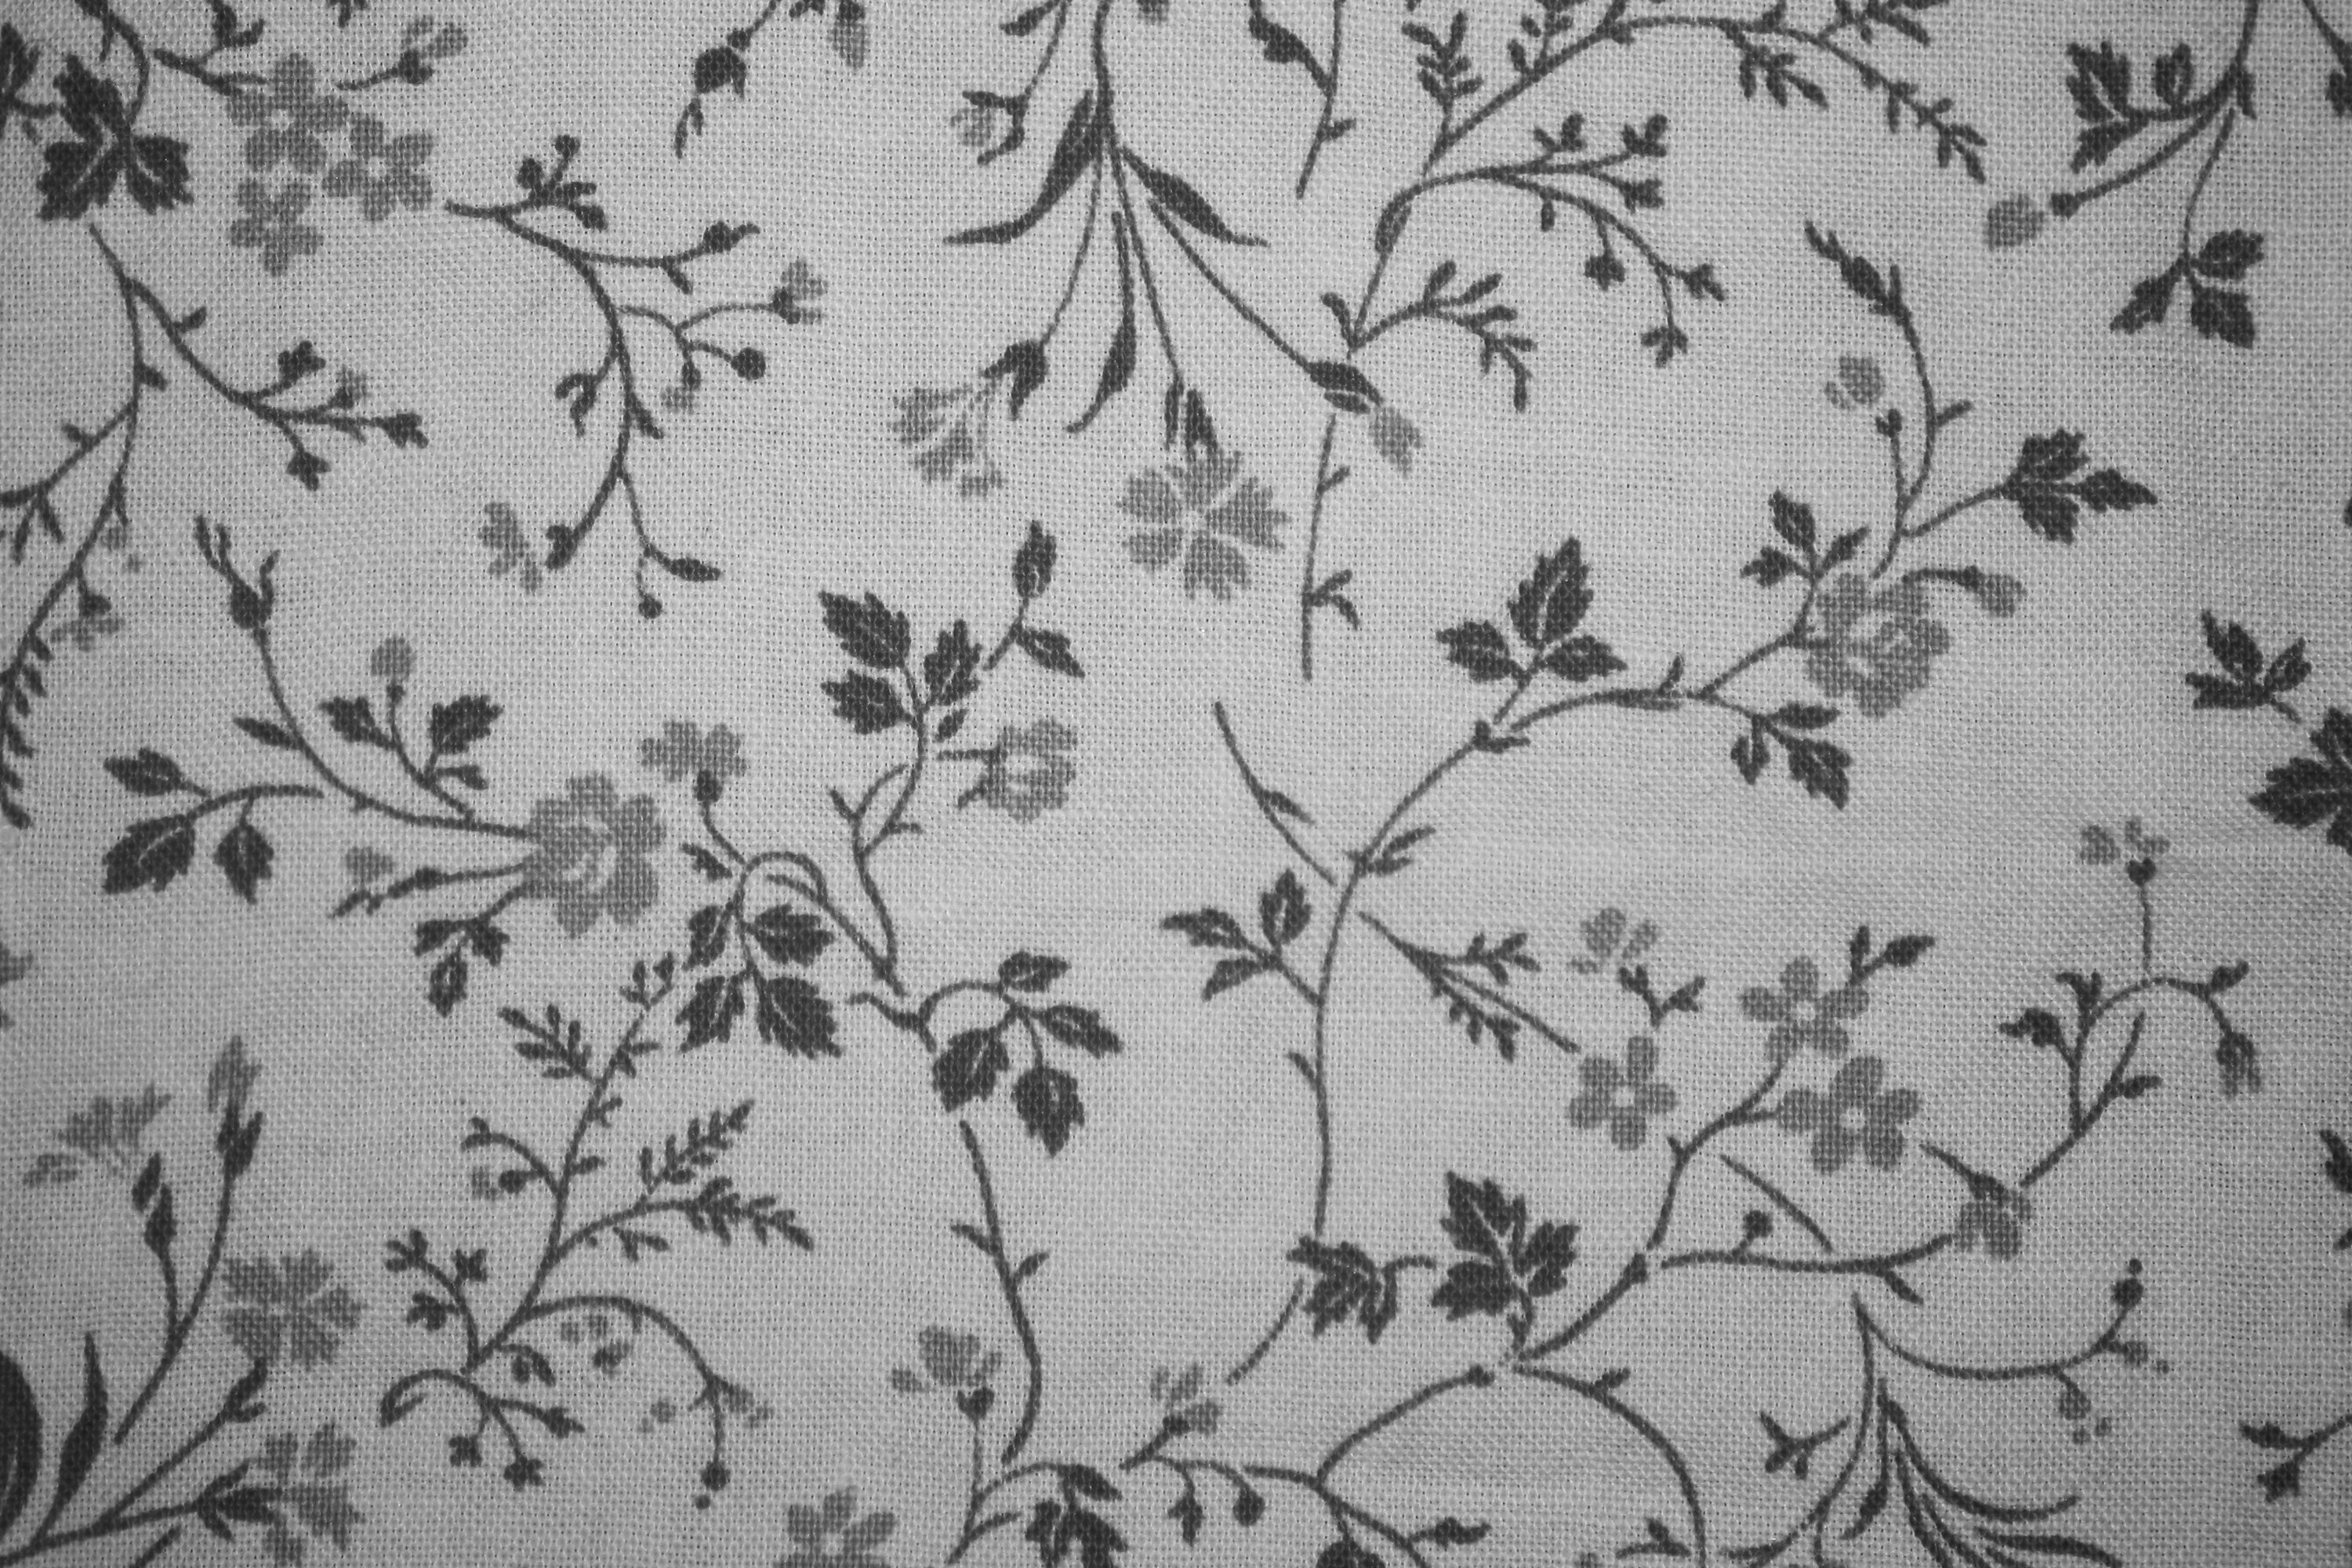 Gray on White Floral Print Fabric Texture Picture, Free Photograph